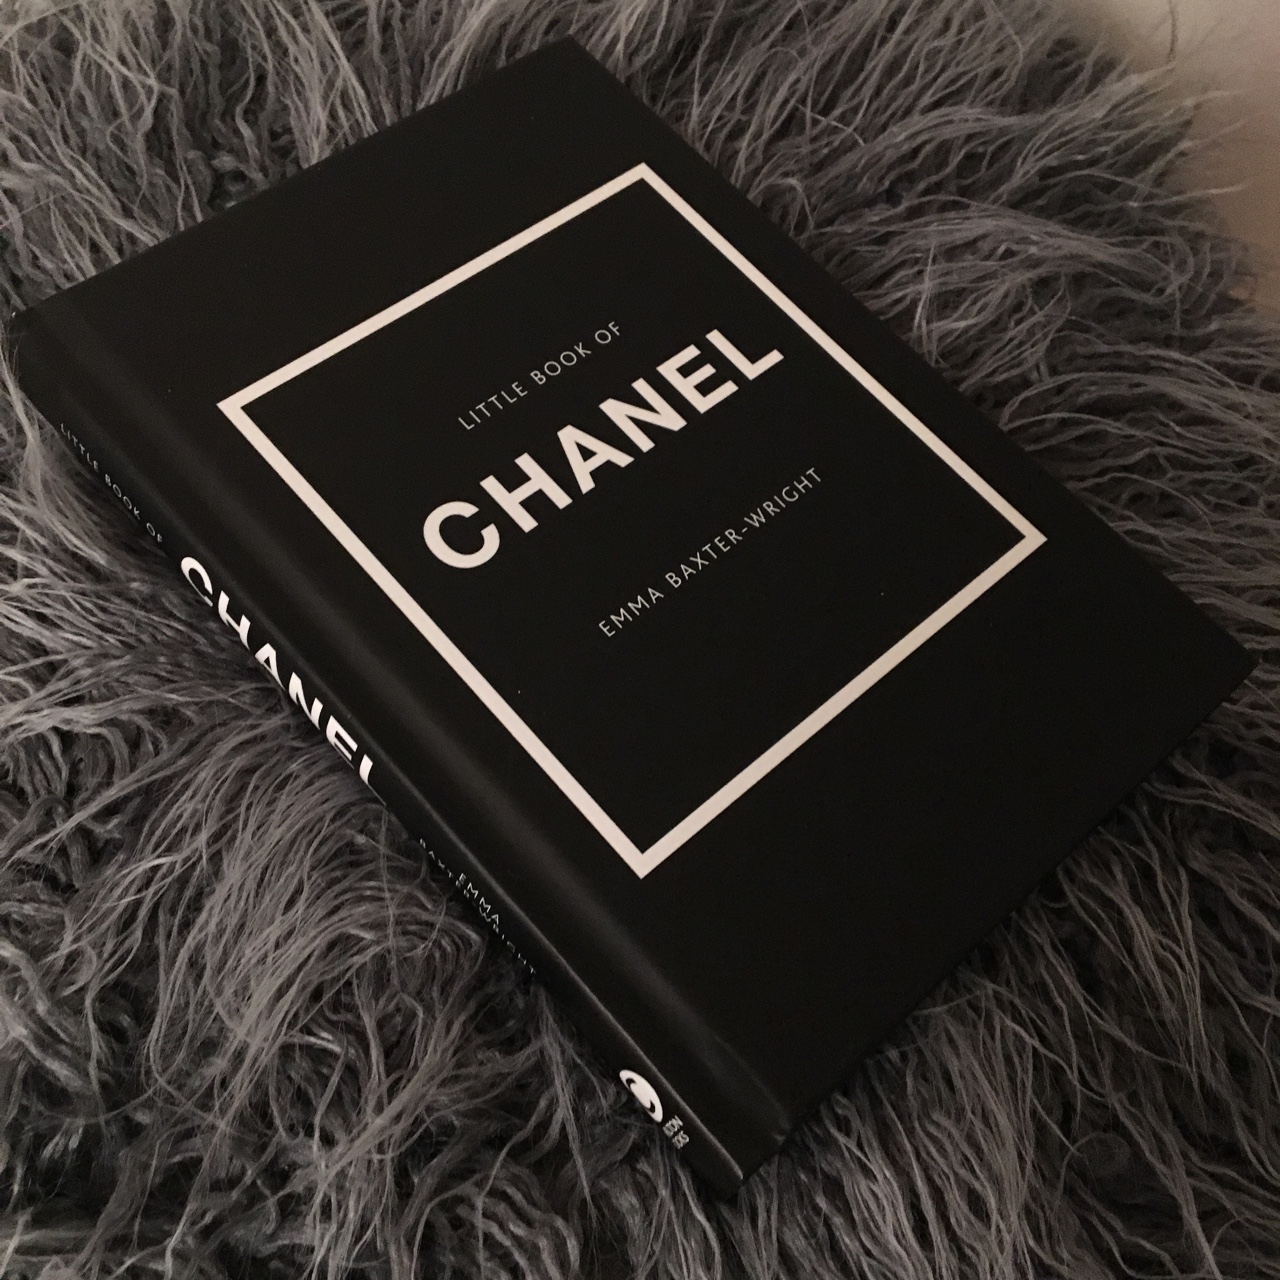 Little book of Chanel